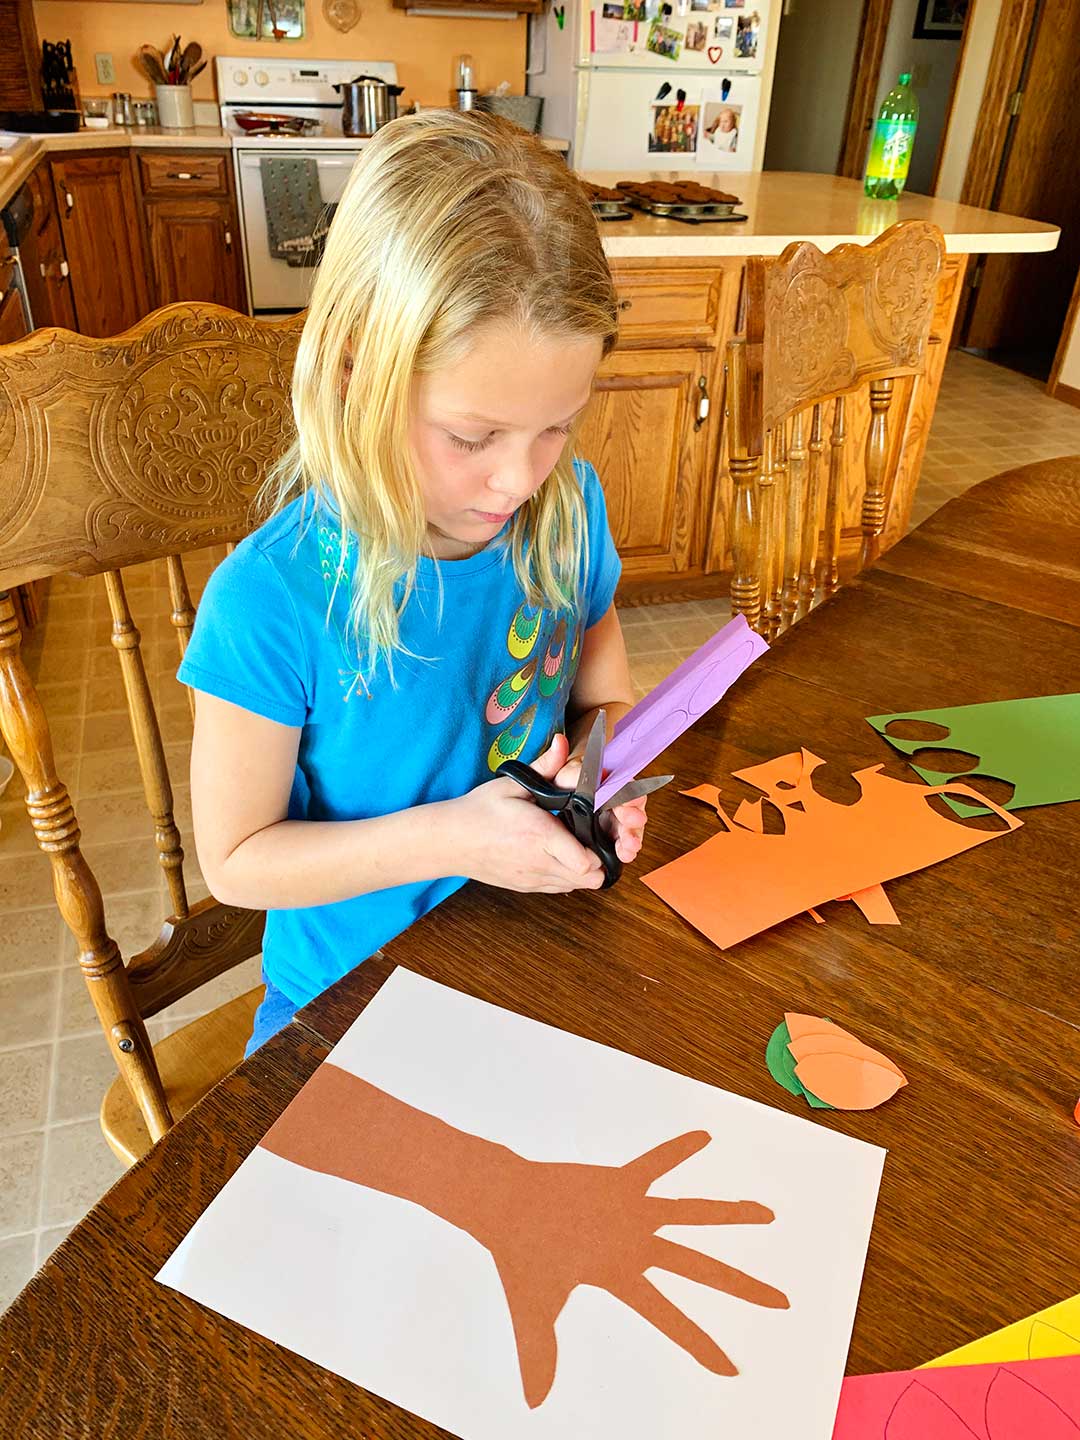 Young girl wearing blue shirt sitting at kitchen table cutting out leaves out of colored construction paper.